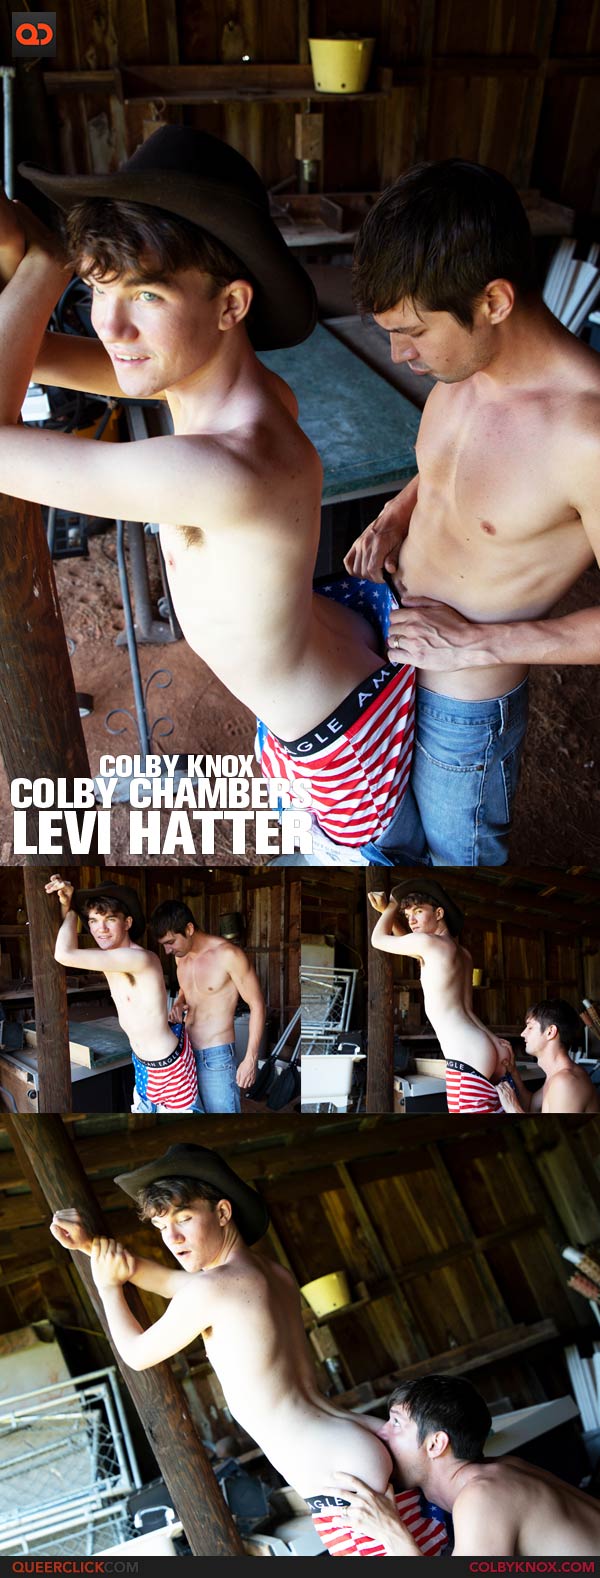 Colby Knox: Levi Hatter - Ass for Kayaks